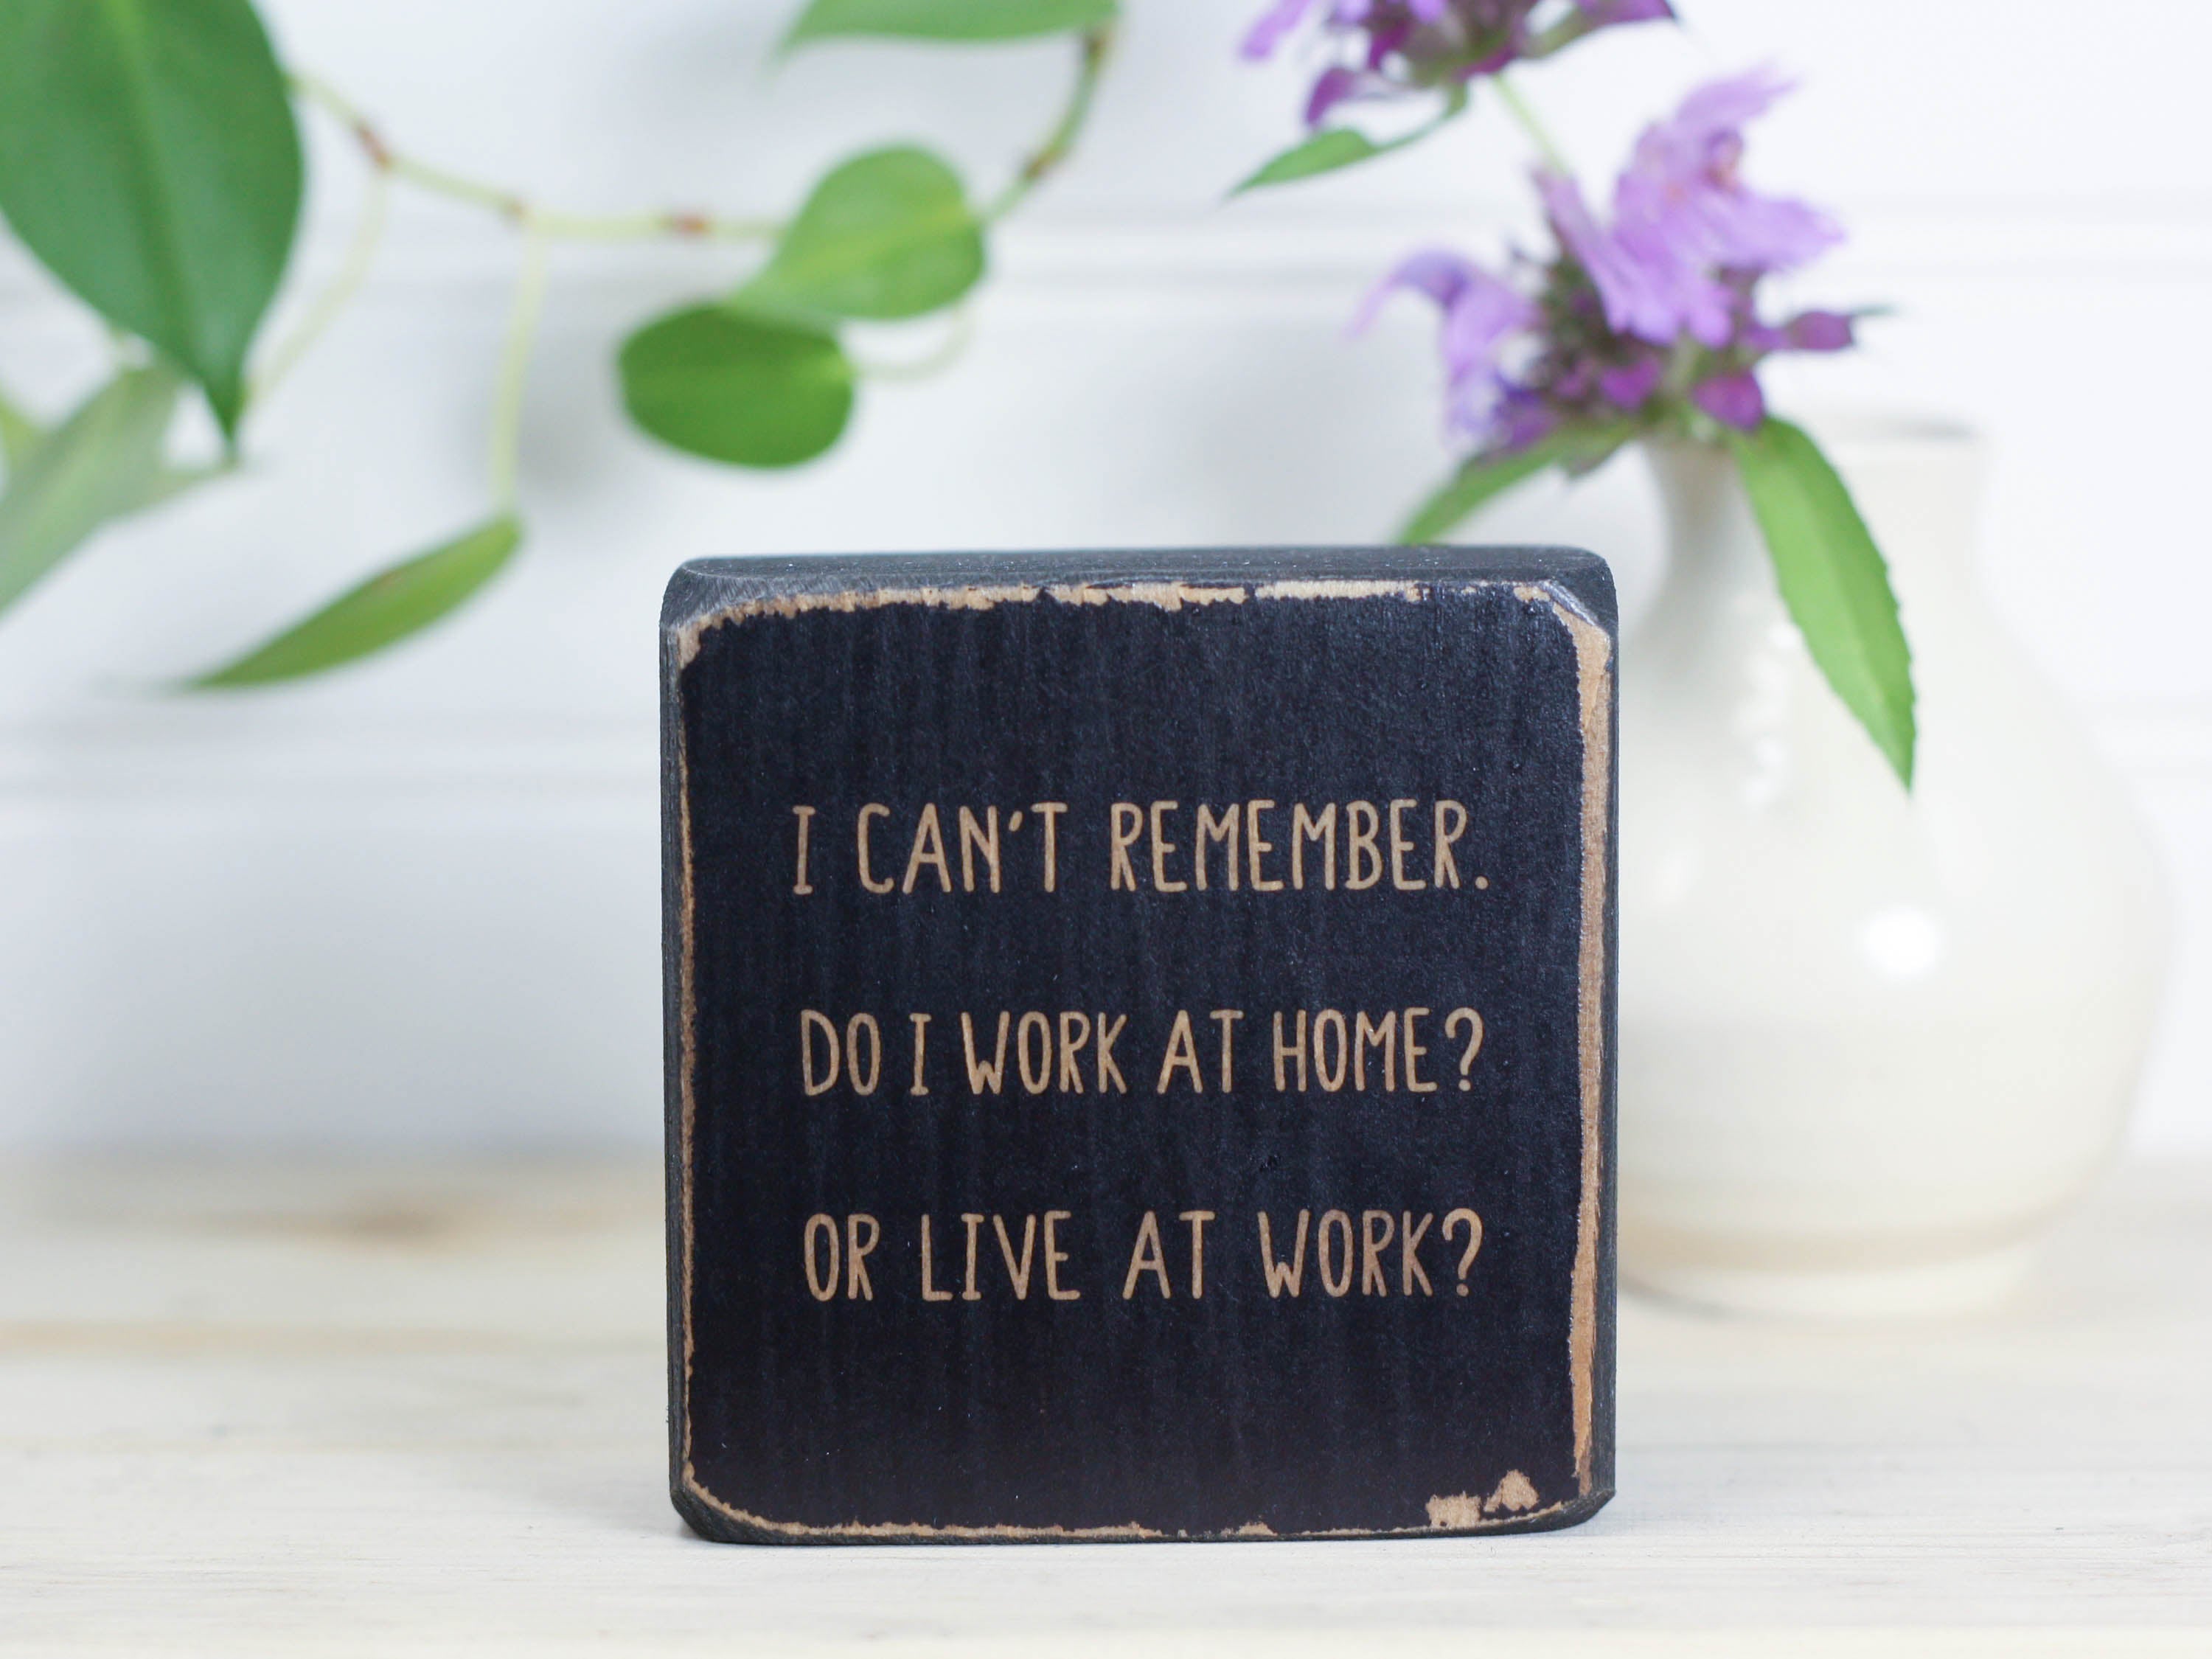 Small, freestanding distressed black wood sign with a funny saying on it "I can't remember. Do I work at home? Or live at work?"